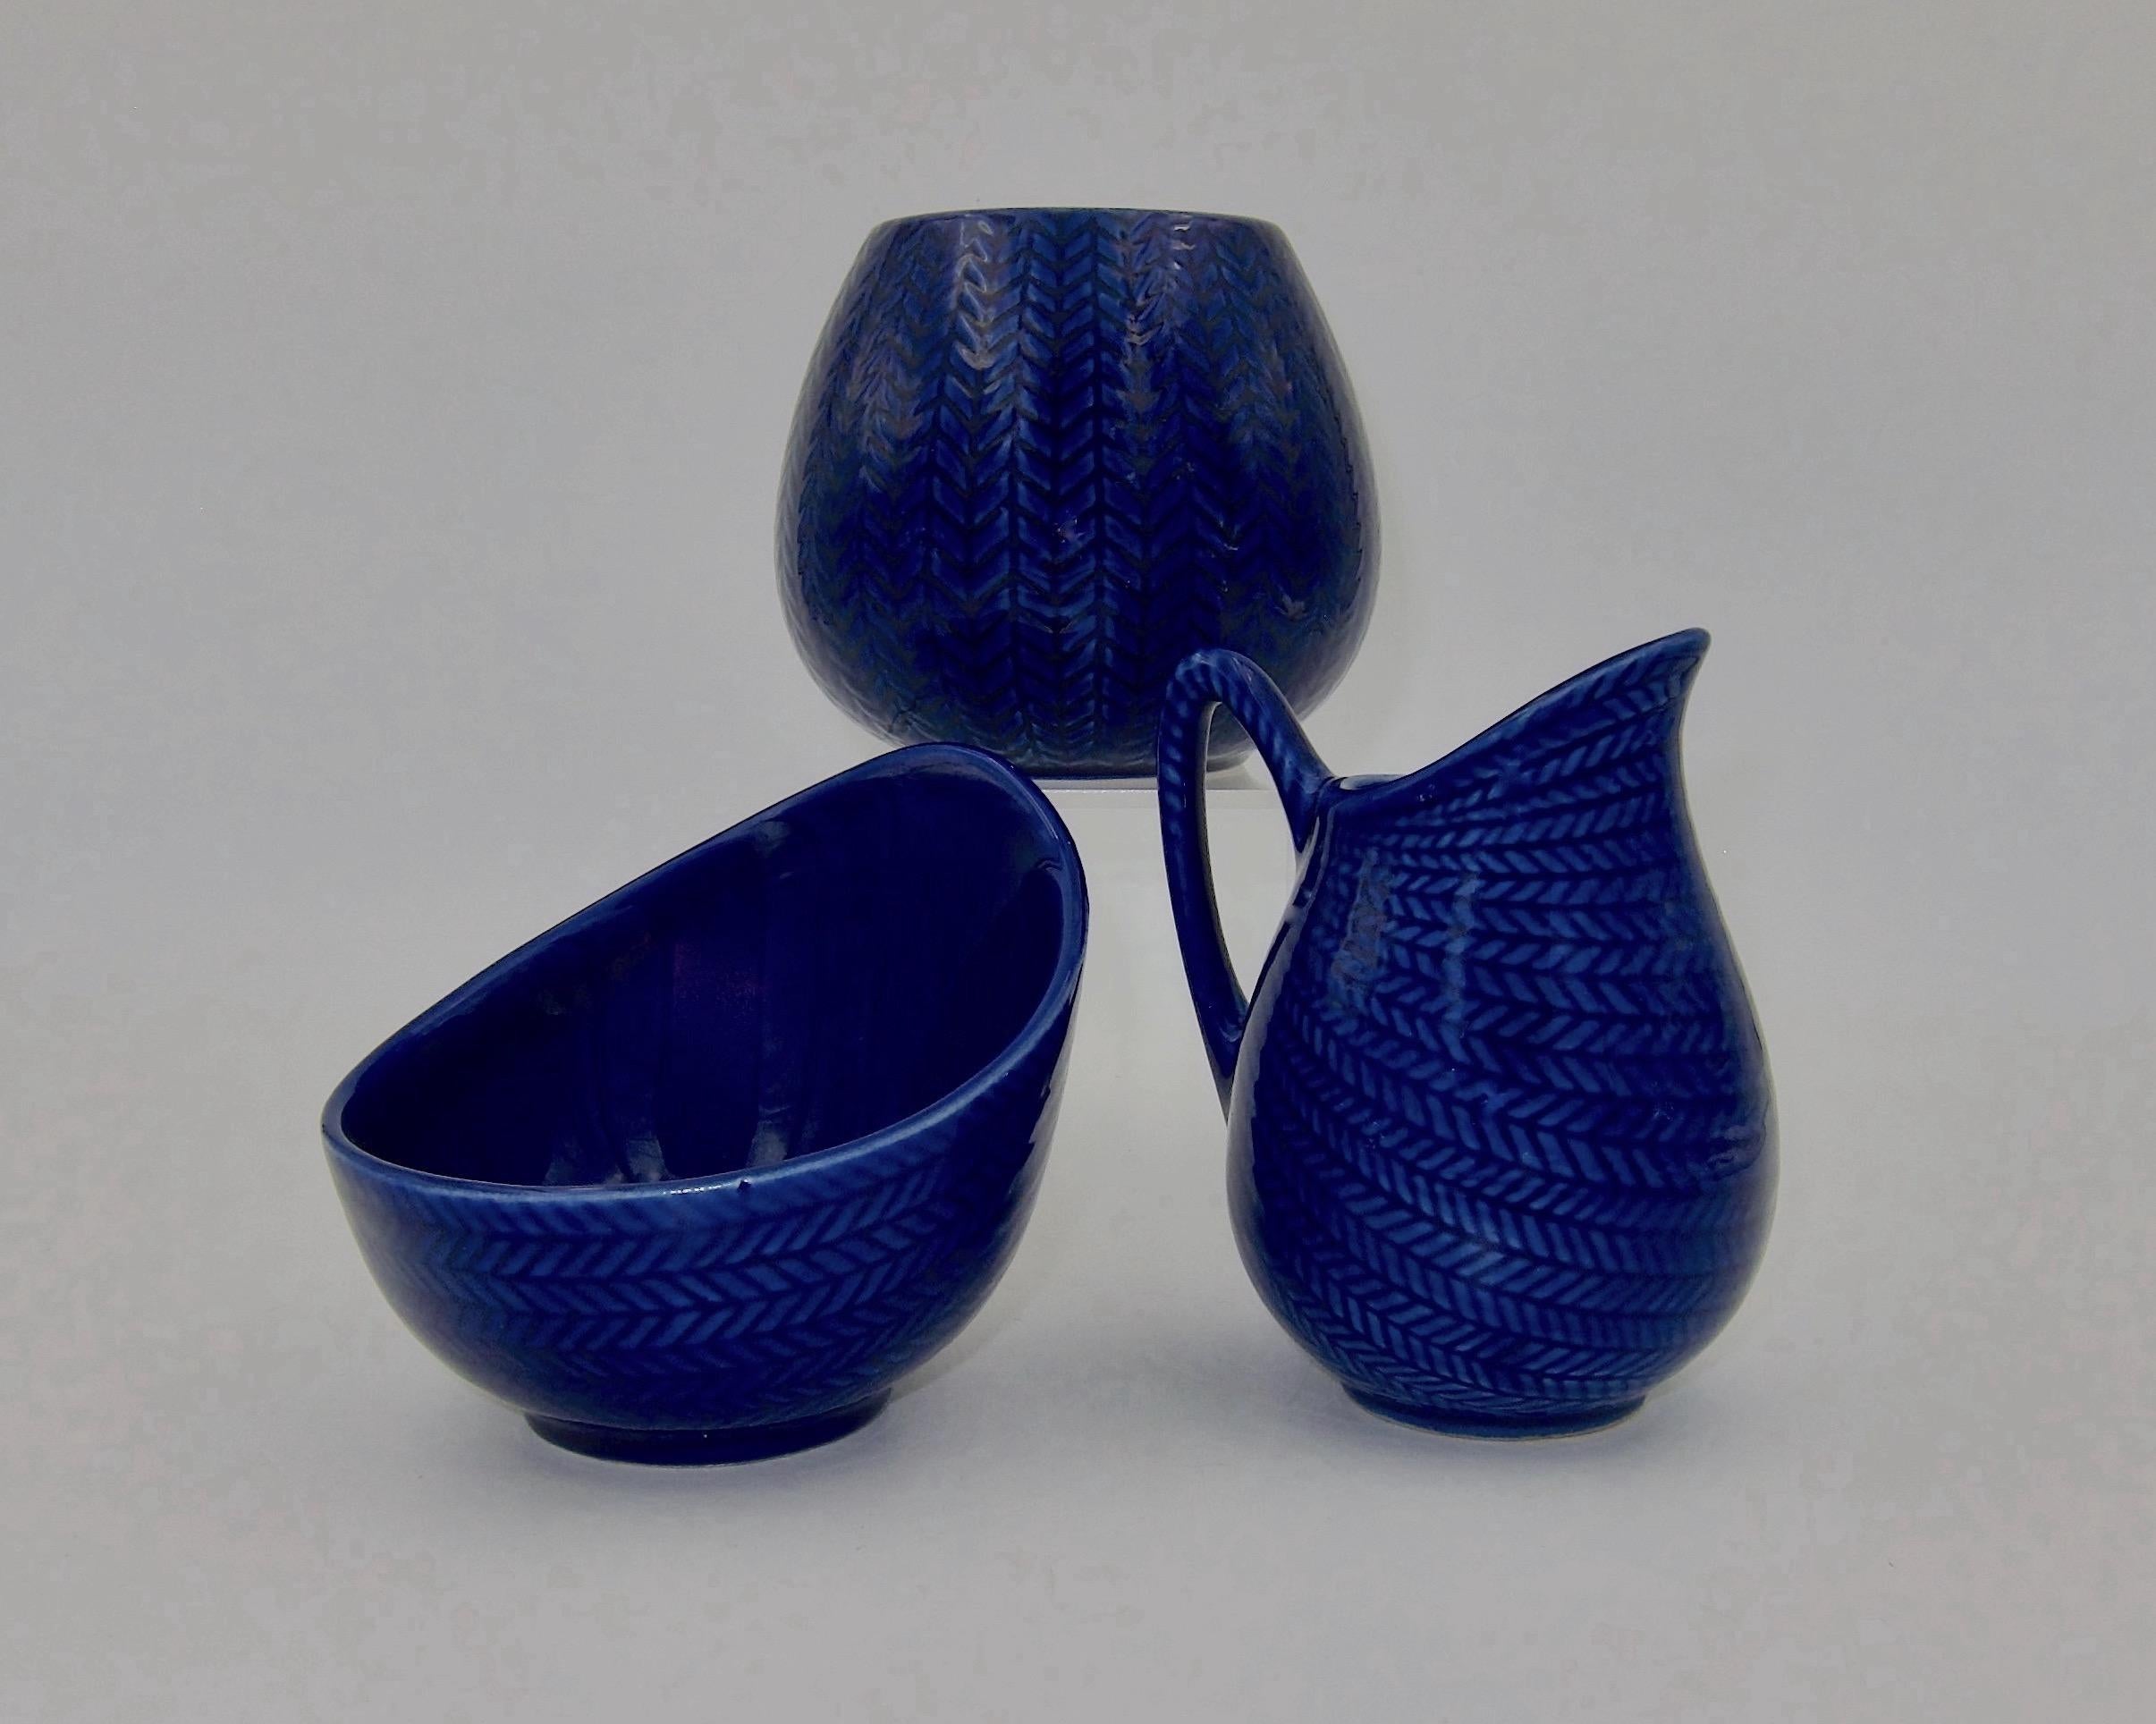 Three Scandinavian Blå Eld / blue Fire midcentury tableware items designed in 1949 by Hertha Bengtson (1917-1993) and manufactured by the Rörstrand Porcelain Factory of Sweden from 1951 to 1971. The Blå Eld line of creamware is considered a